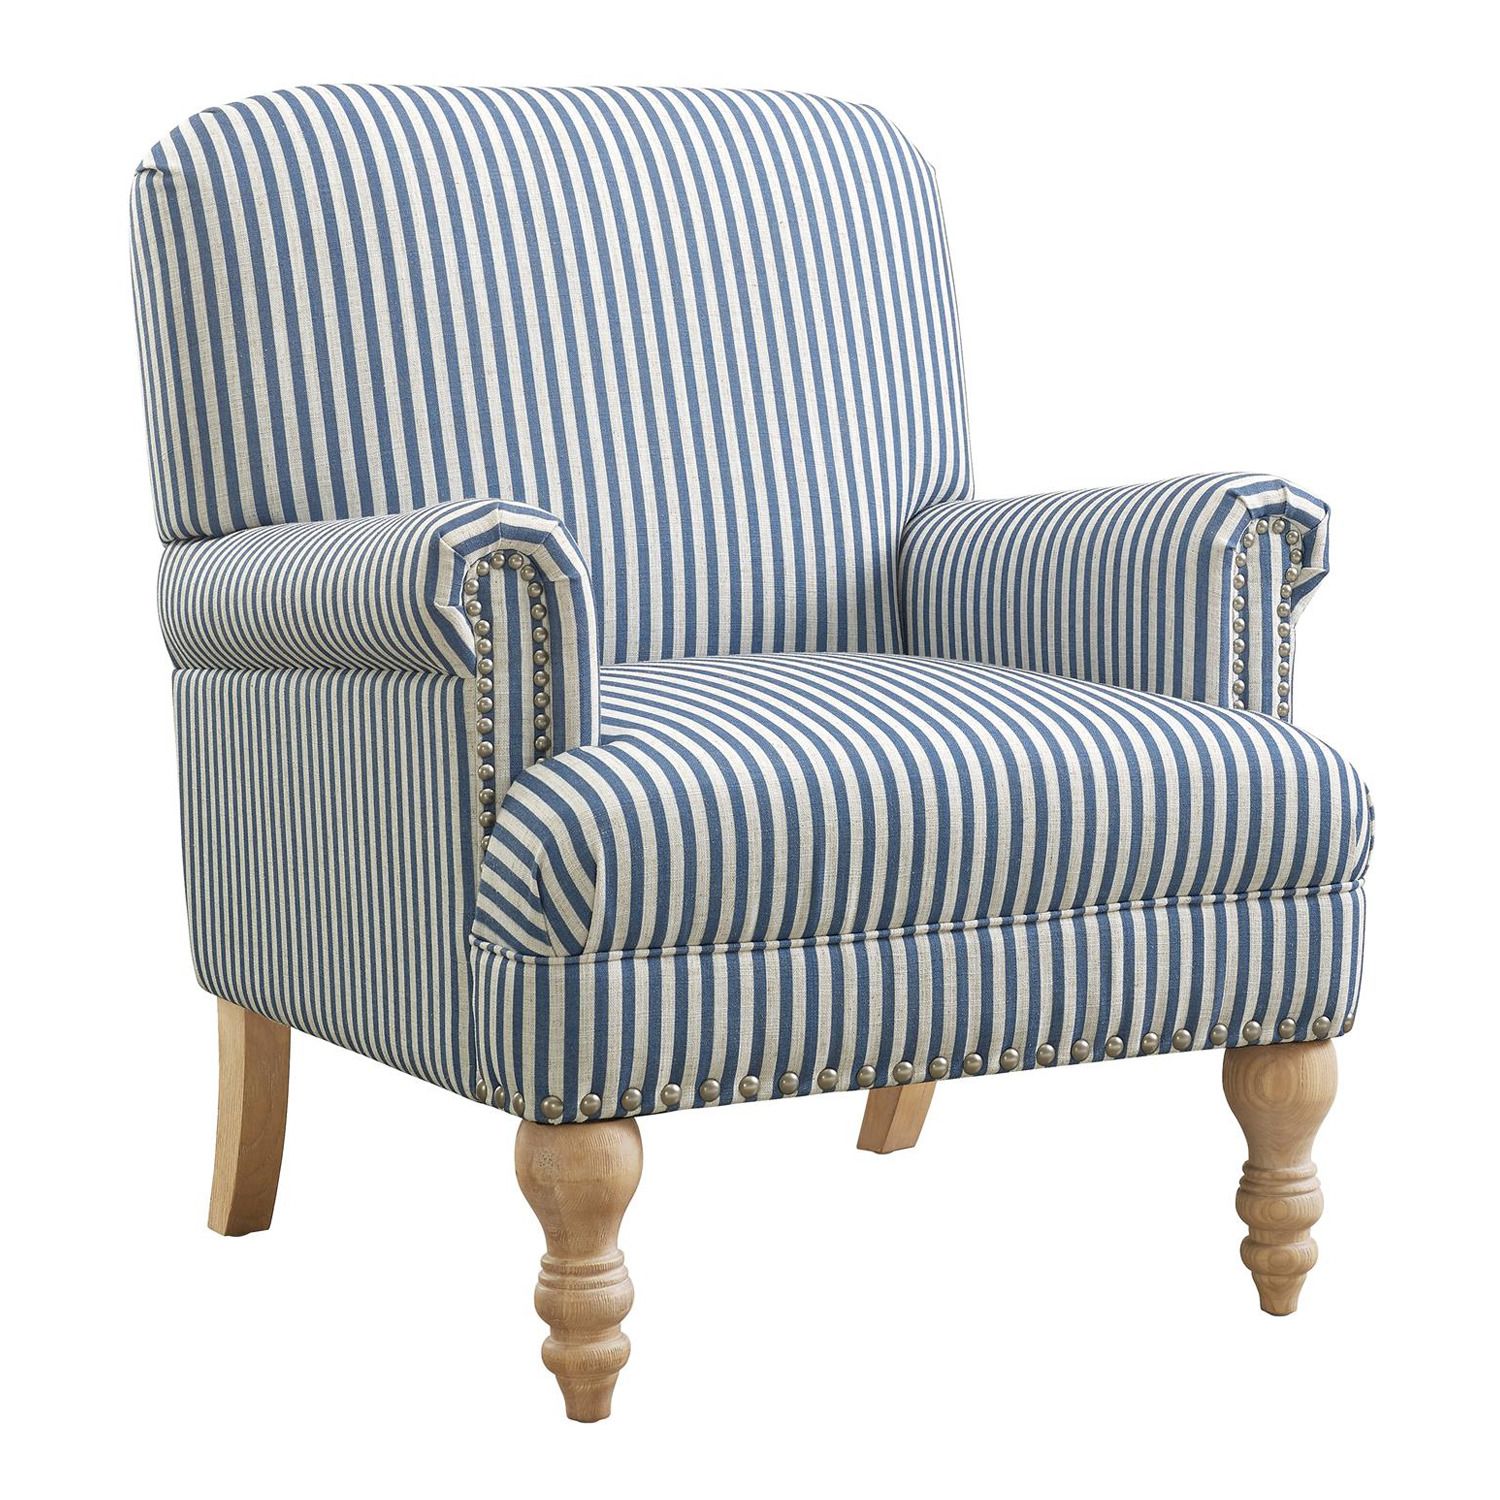 Image for Dorel Living Jaya Accent Chair at Kohl's.